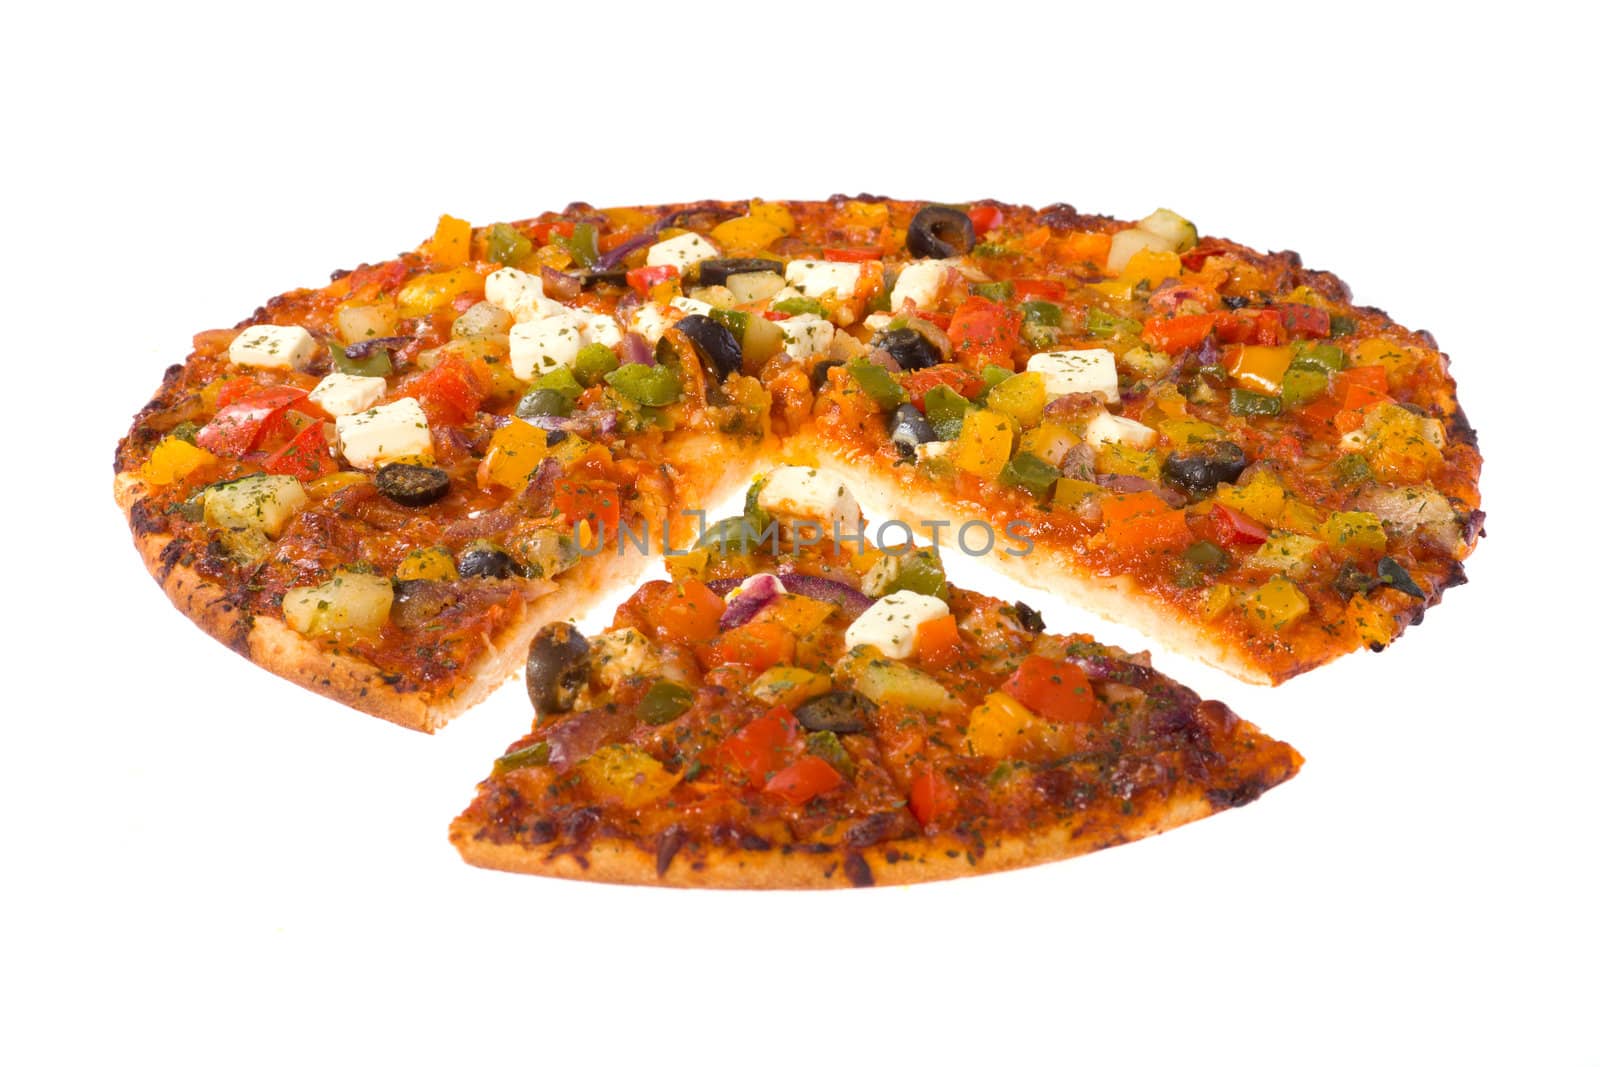 vegetarian pizza, photo on the white background